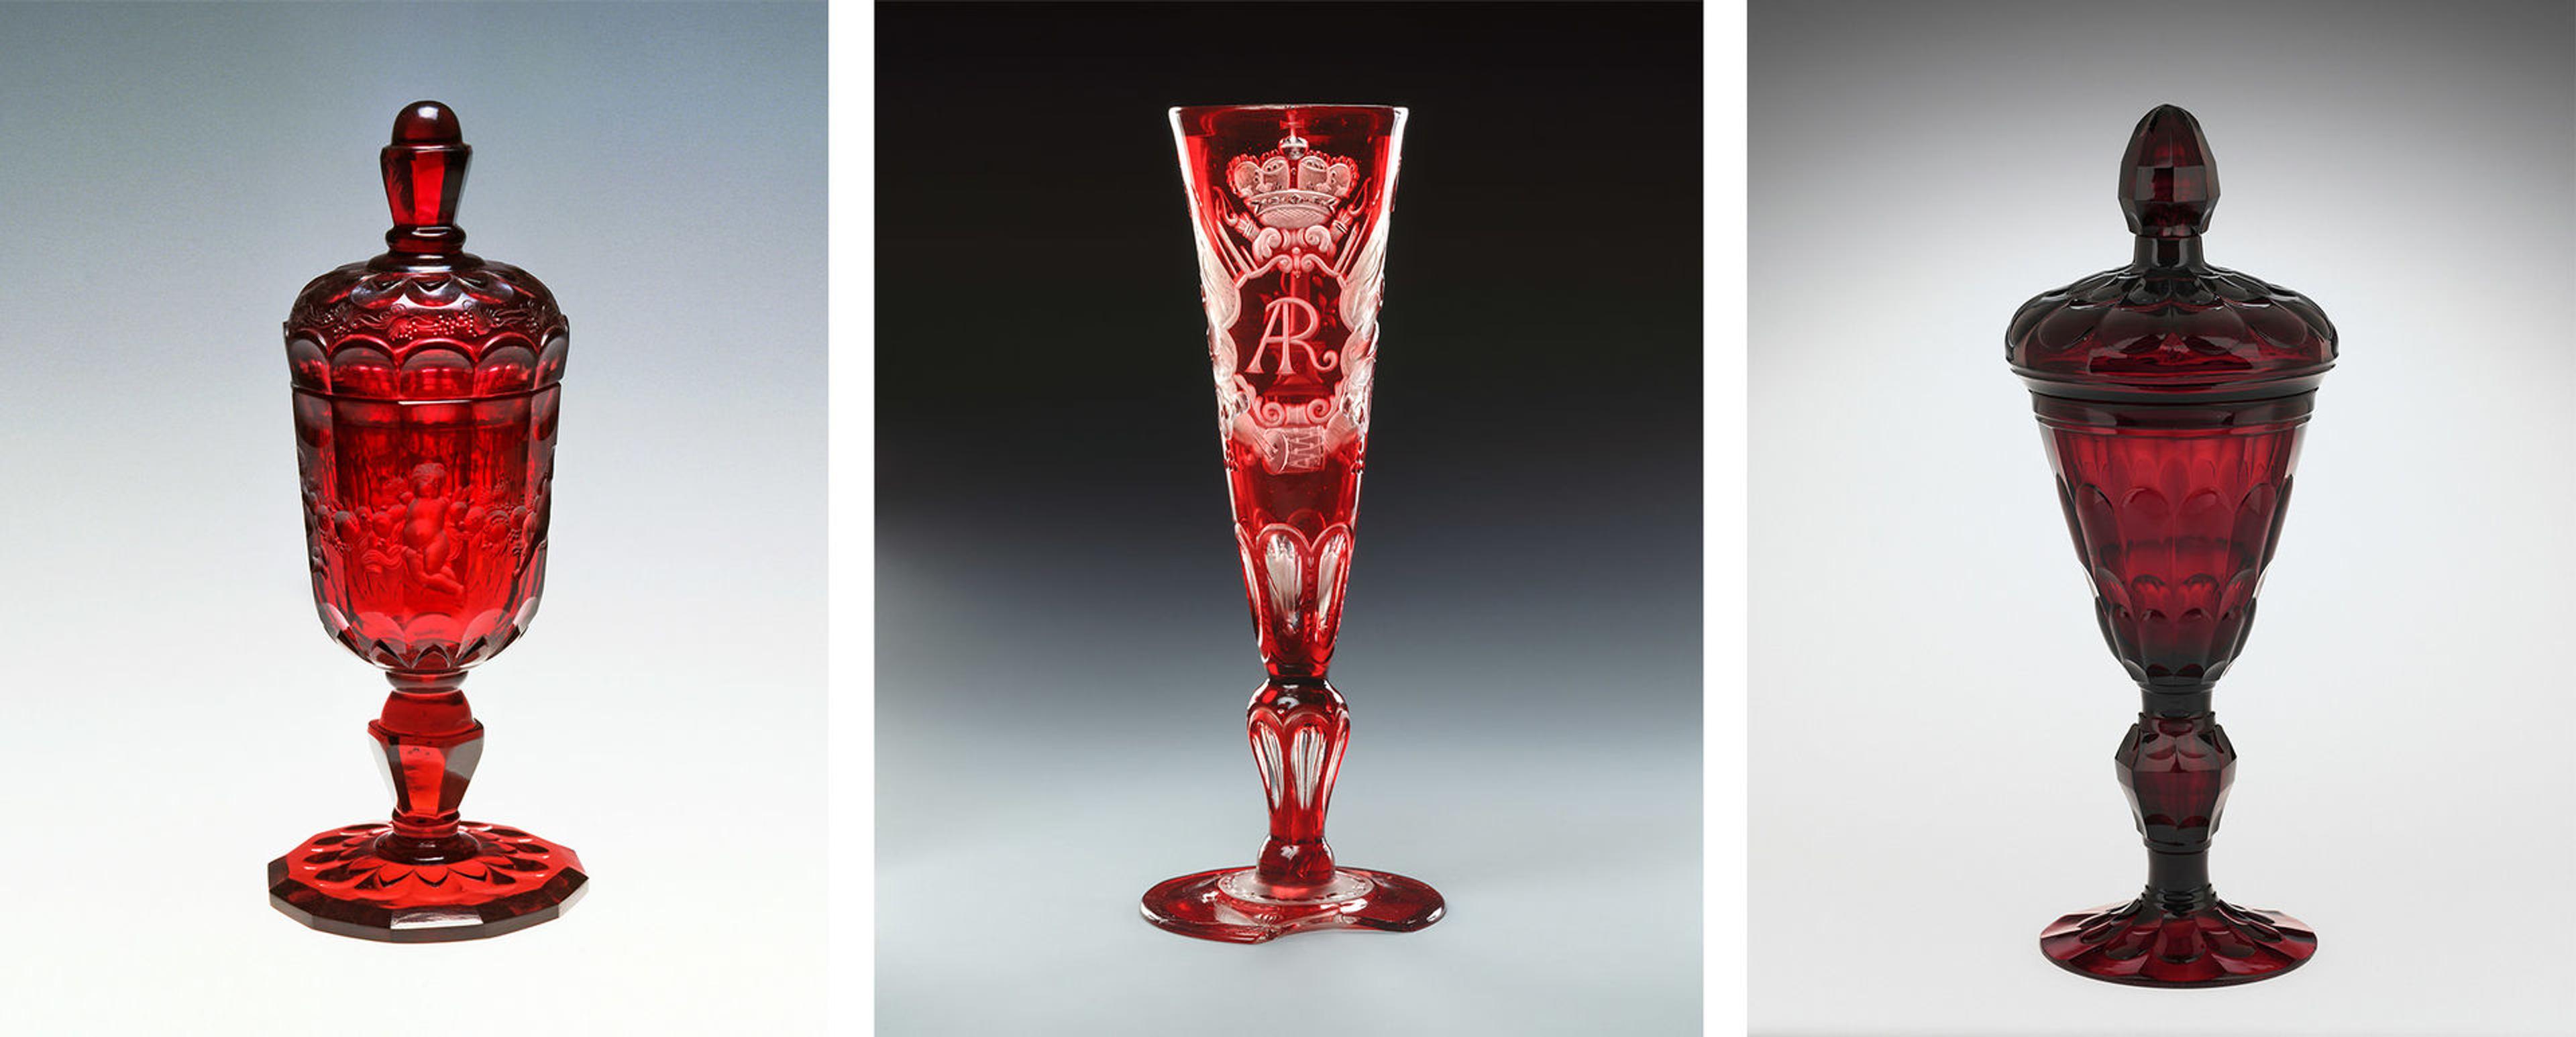 A composite of three ruby-red goblets, two with lids and the third intricately engraved with the initials "AR"